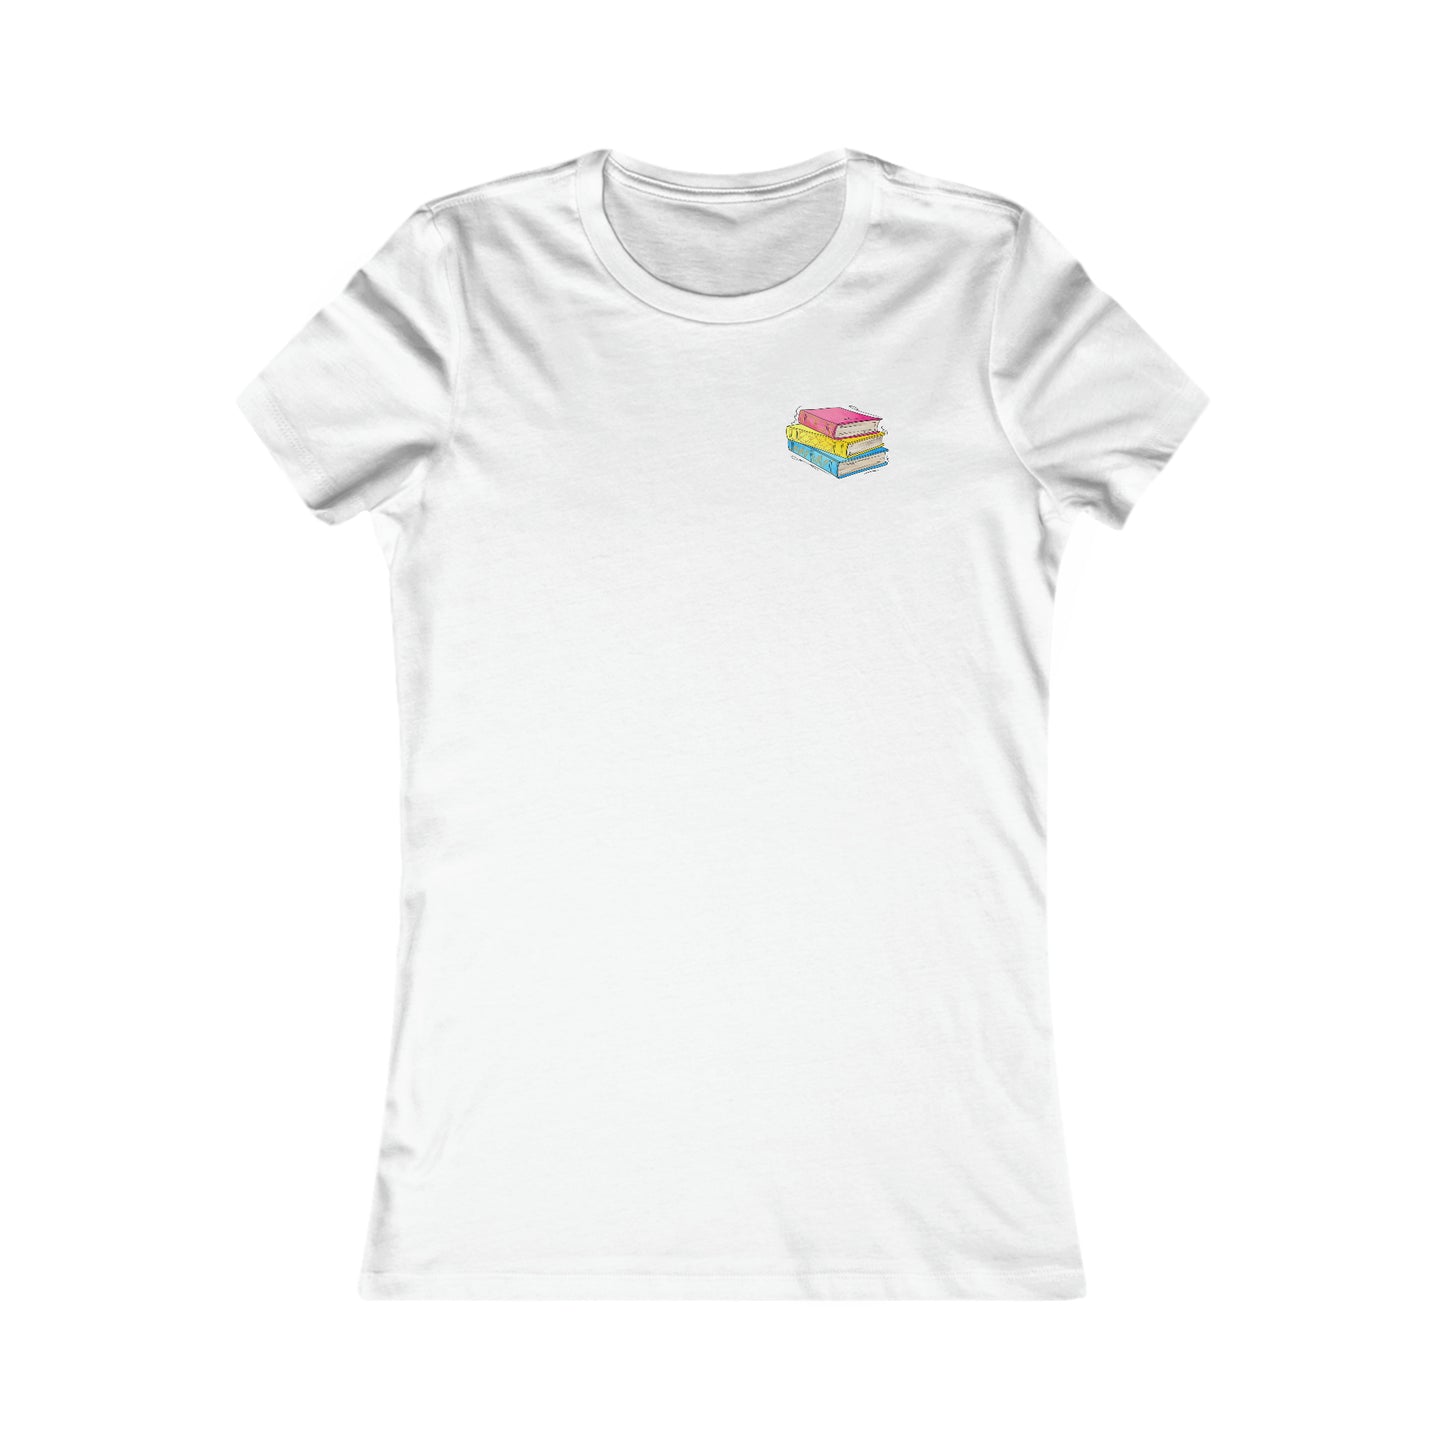 Pansexual Pride Flag Old Books - Women's T-Shirt